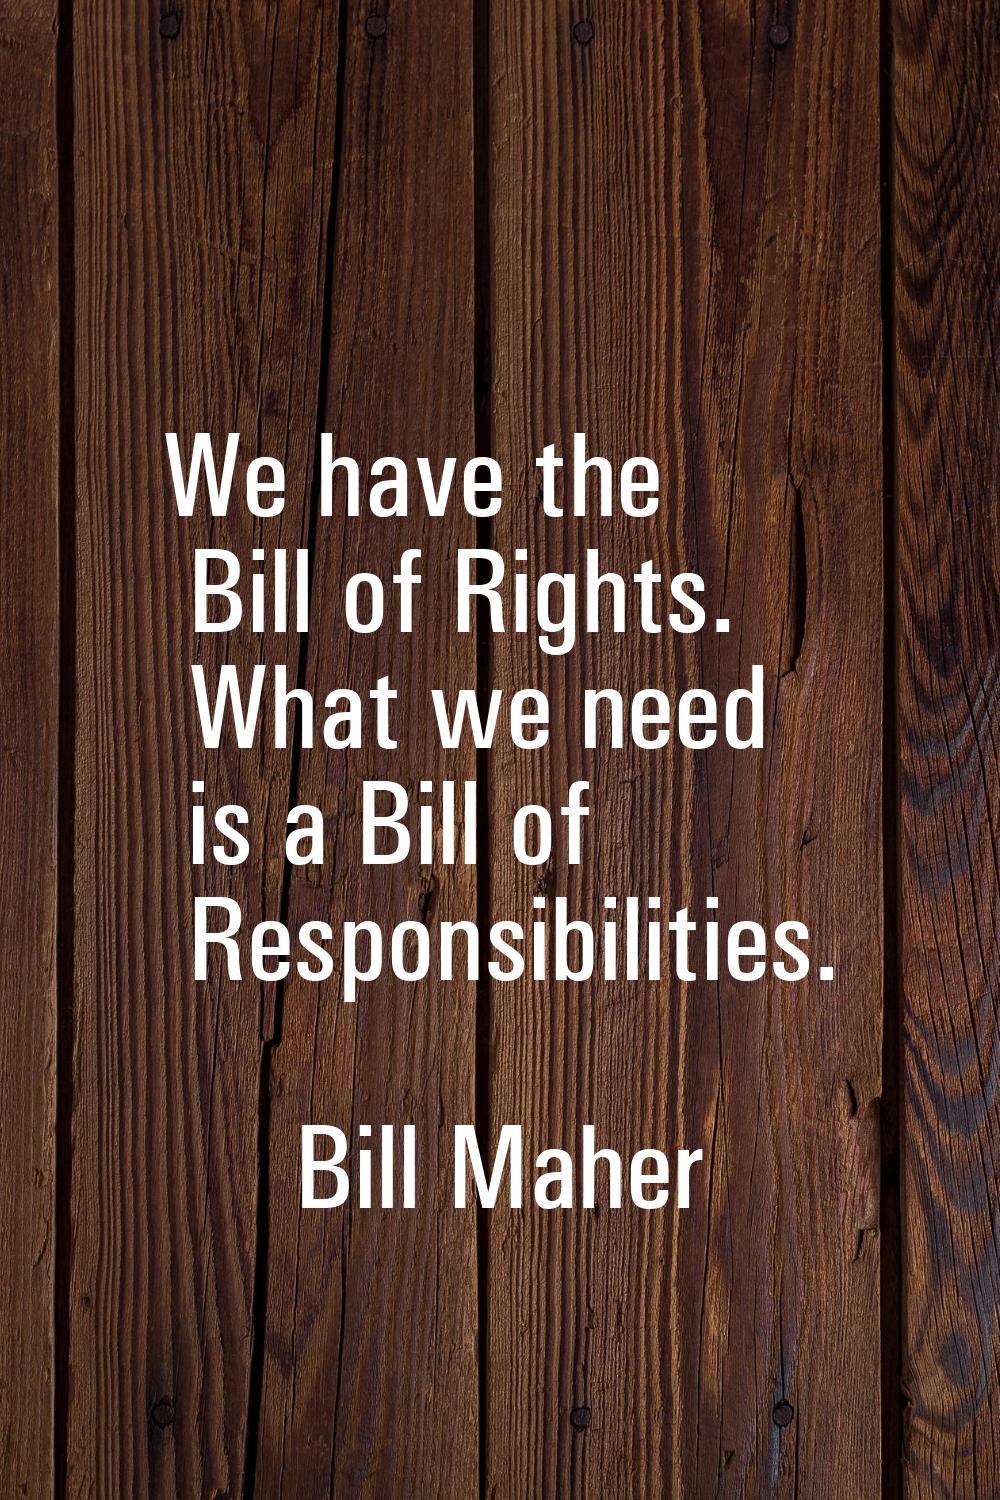 We have the Bill of Rights. What we need is a Bill of Responsibilities.